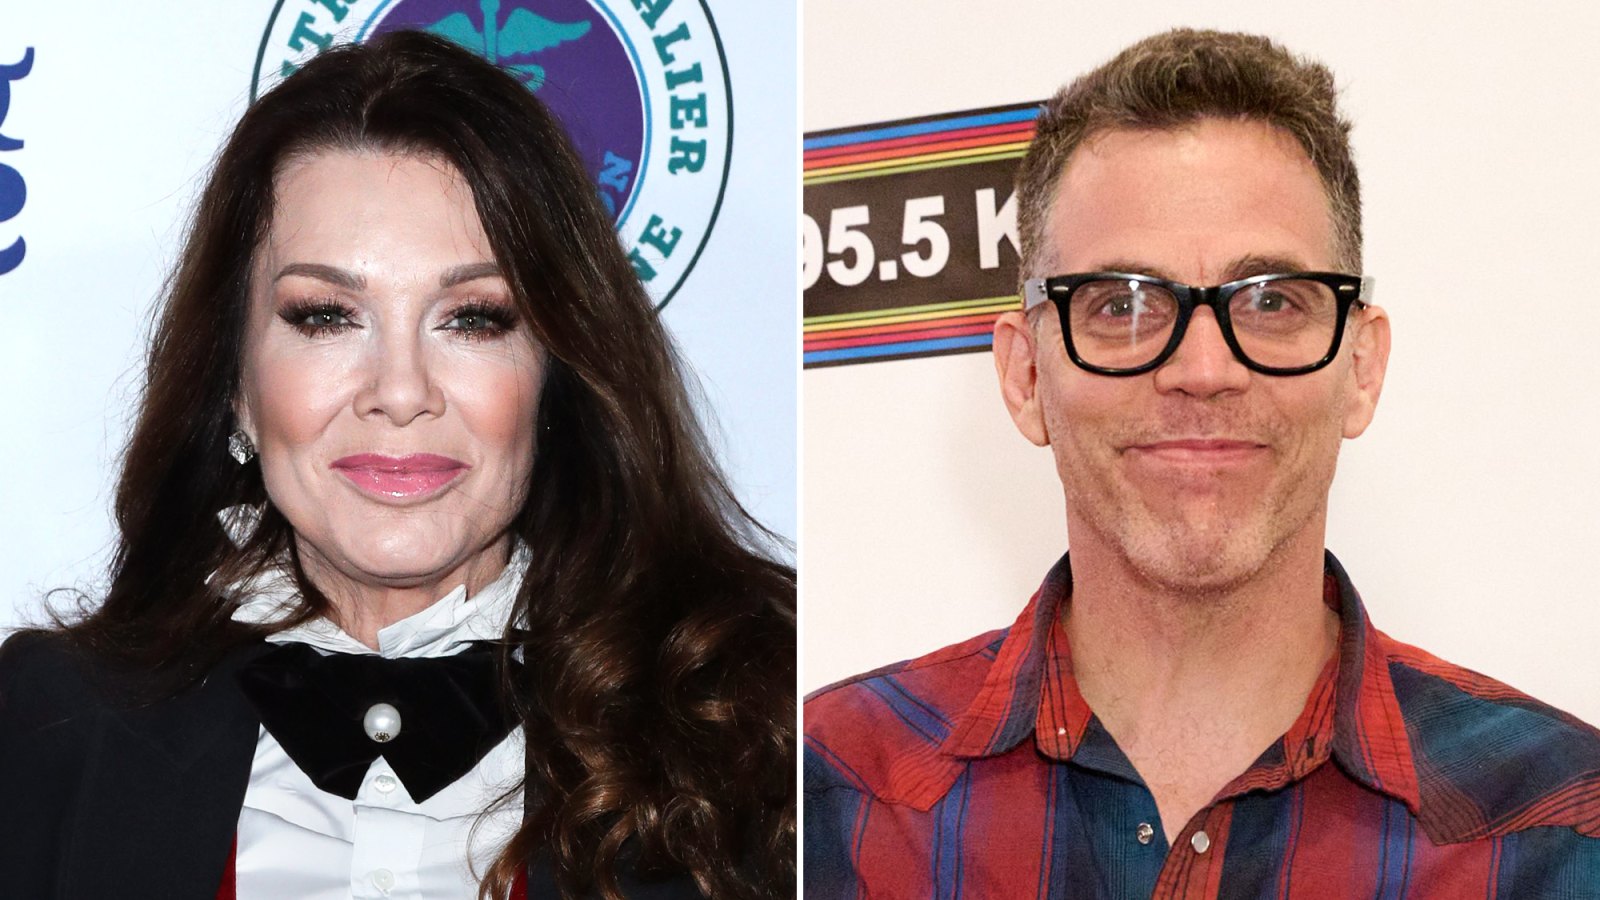 Lisa Vanderpump Teases 'Pump Rules' Reunion on Steve-O's Podcast: It Was 'Intense and Emotional'